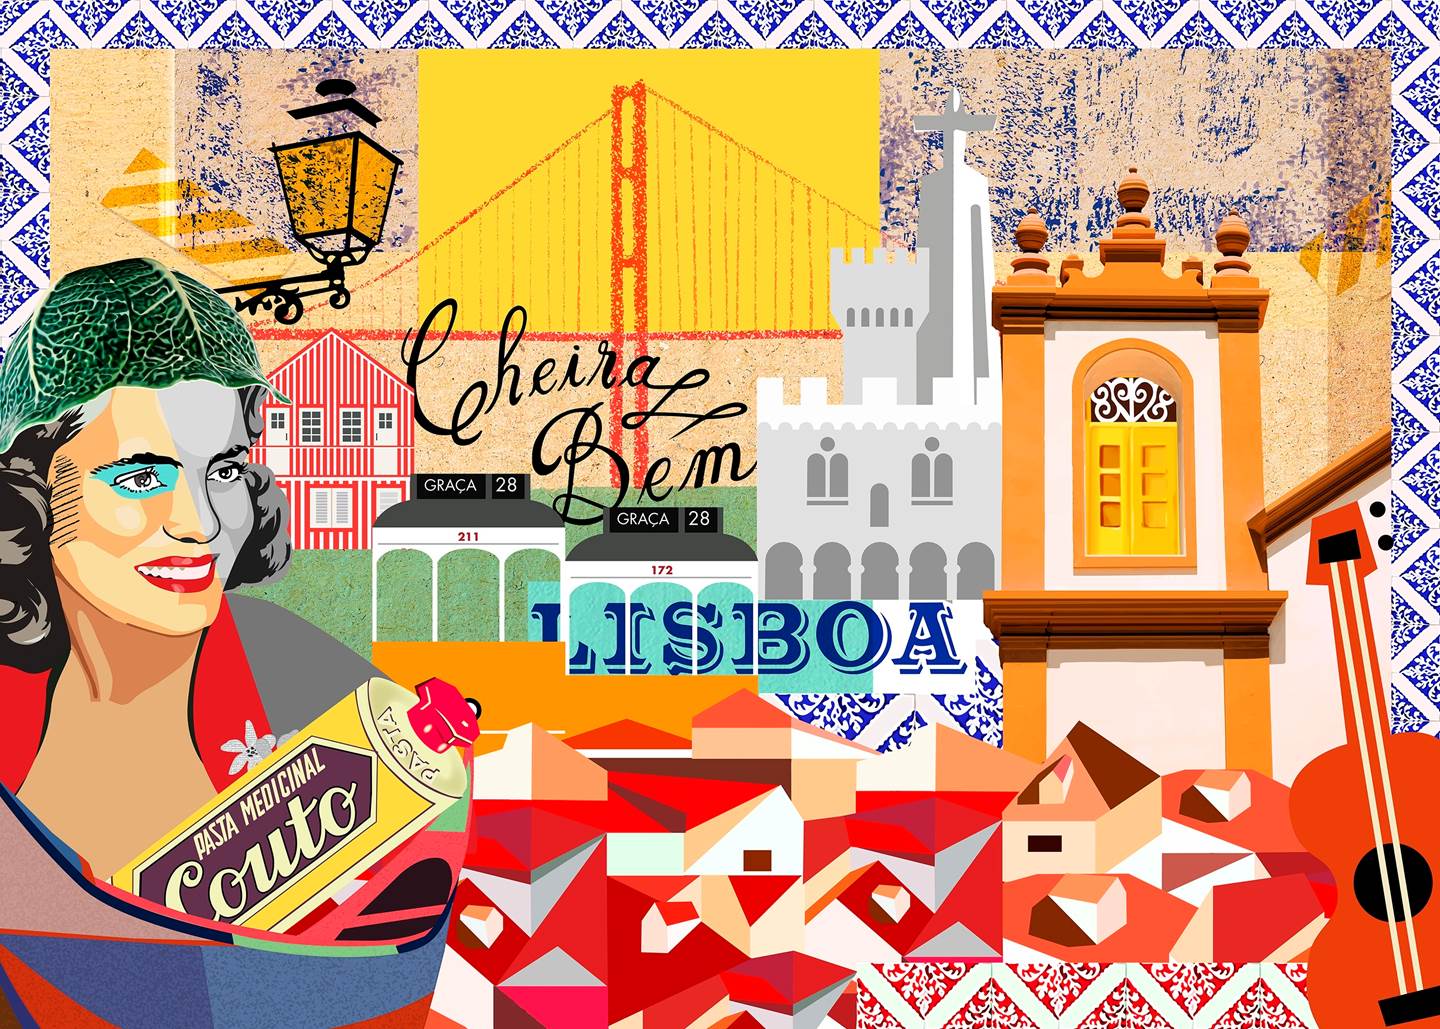 Tela "Cheira a Lisboa", original Abstract Collage Drawing and Illustration by Maria João Faustino